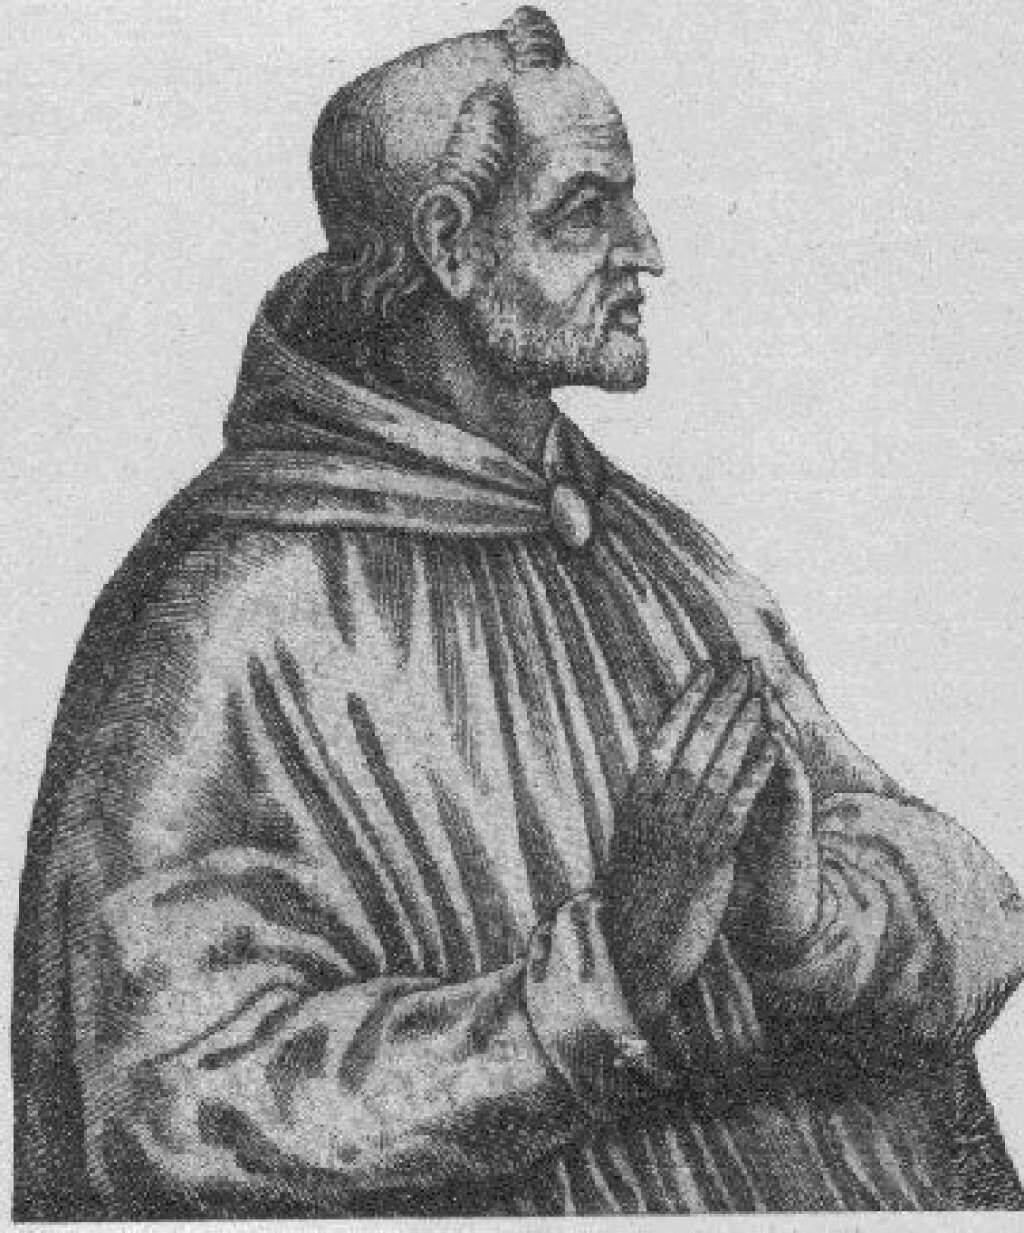 Jean XXI - Sept. 8, 1276 – May 20, 1277